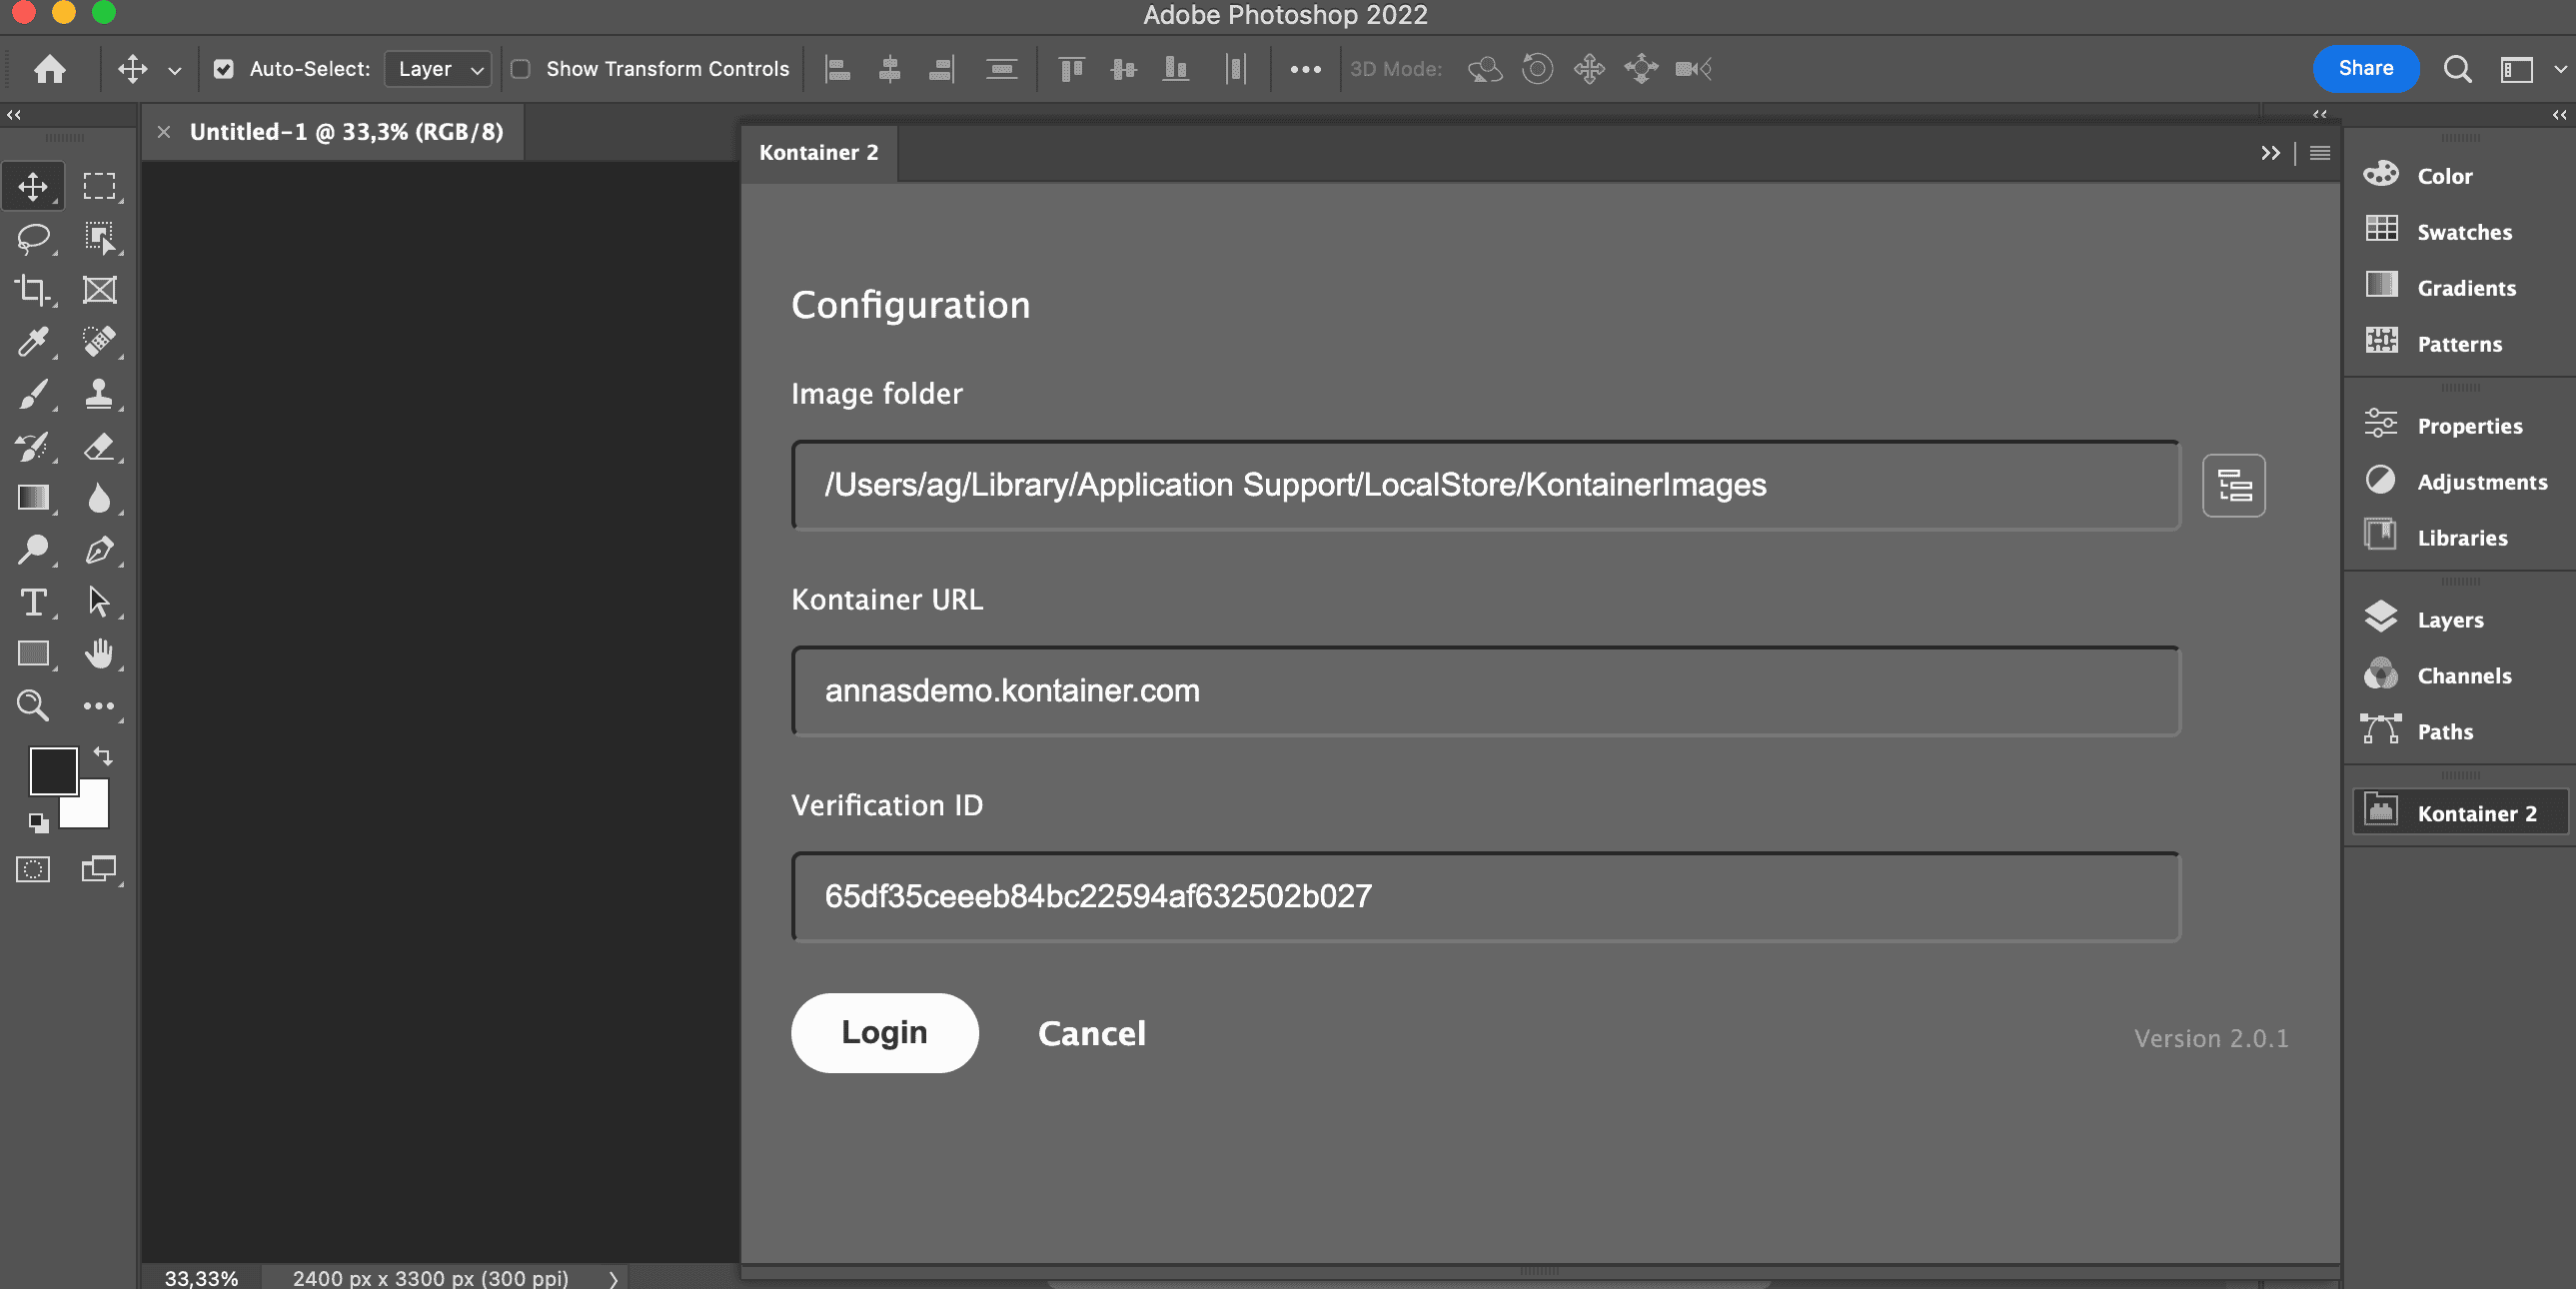 Configuring Kontainer connection in Photoshop